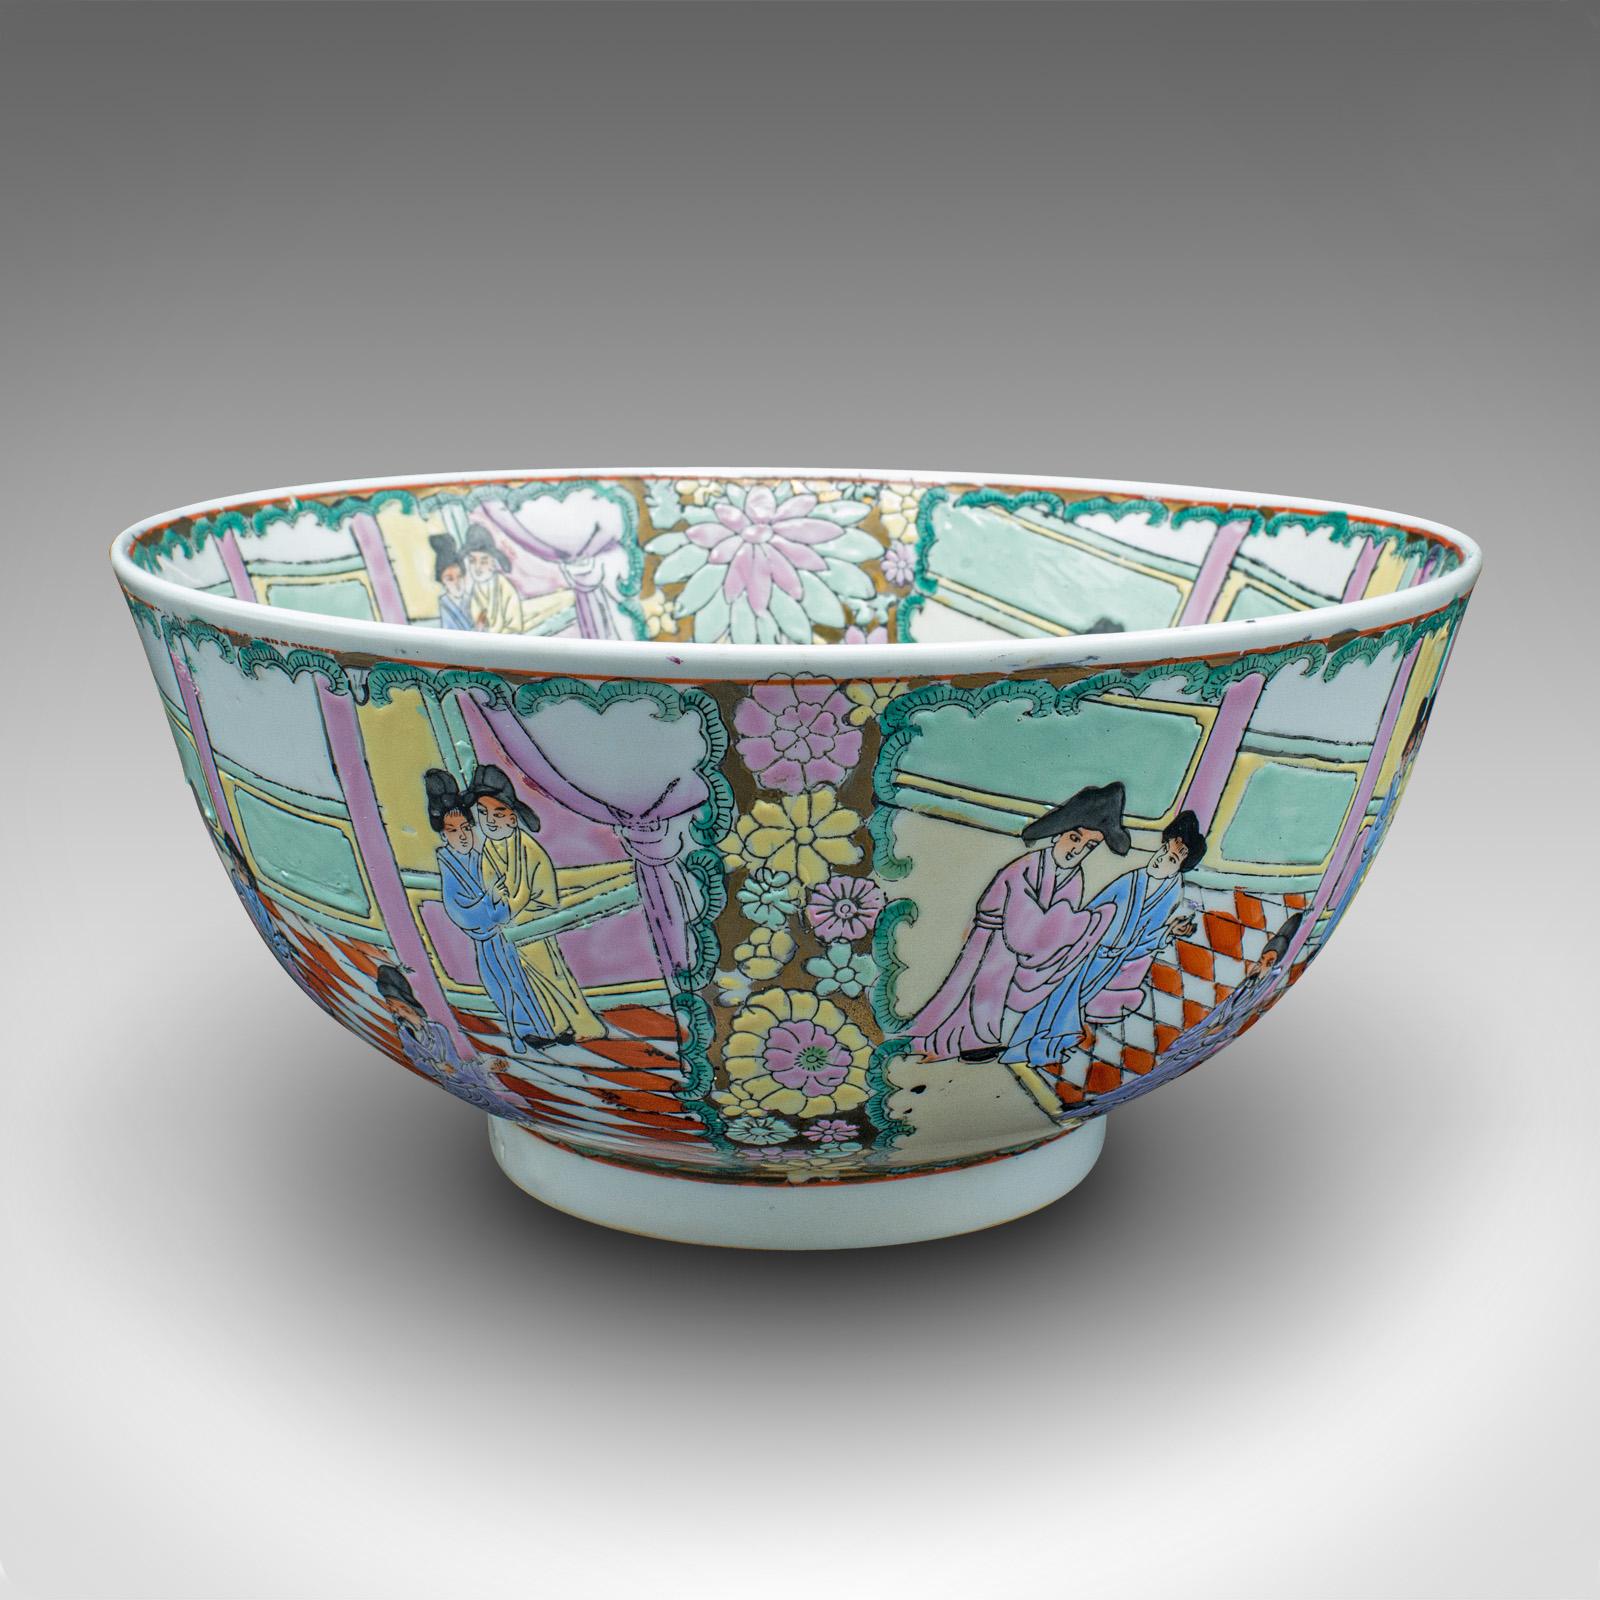 19th Century Antique Decorative Bowl, Chinese, Ceramic Serving Dish, Qing Dynasty, Victorian For Sale